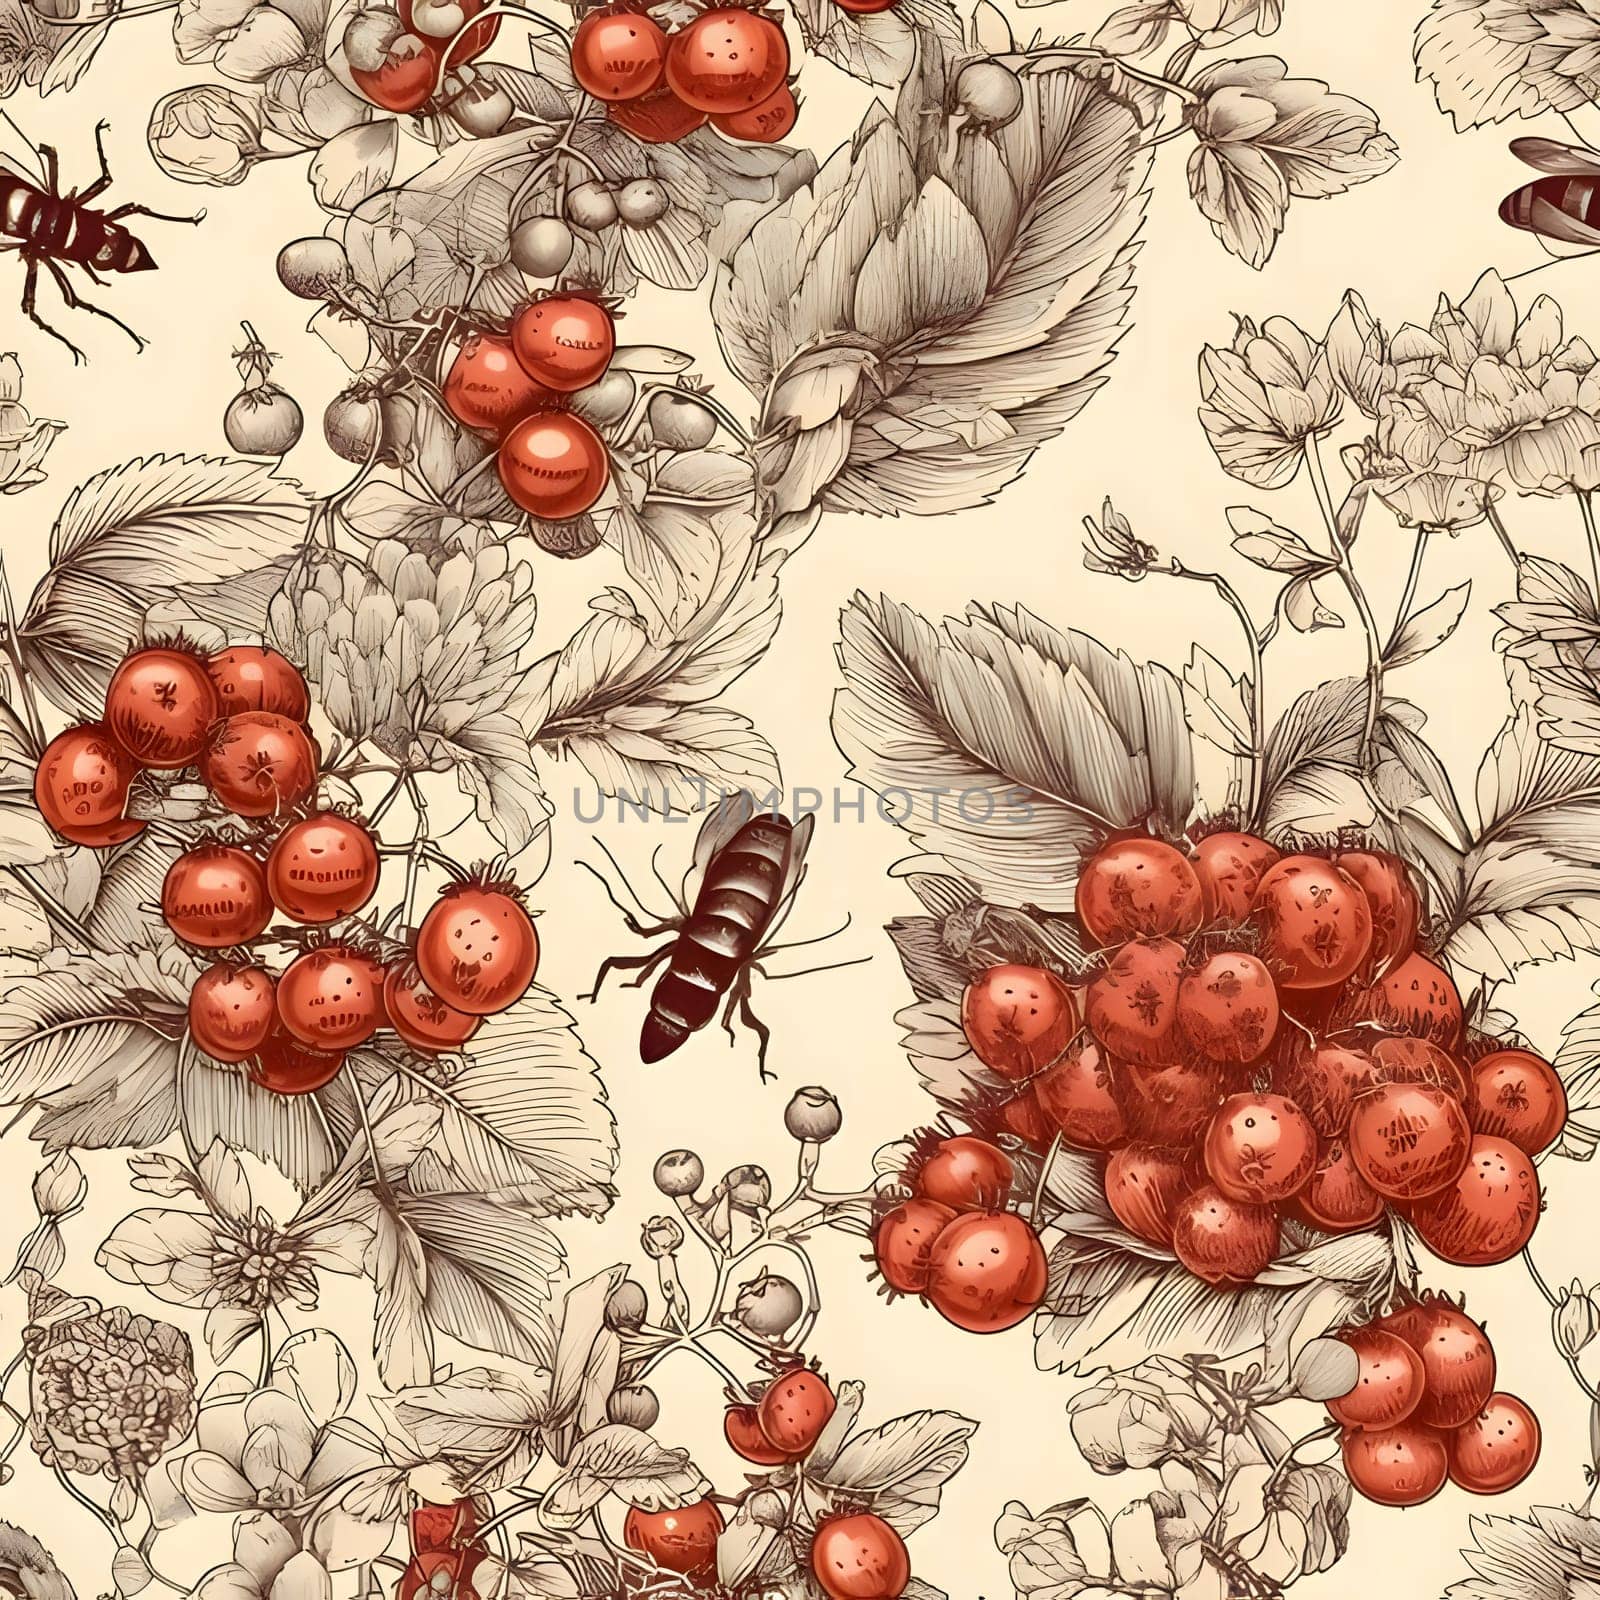 Patterns and banners backgrounds: Seamless pattern with red berries. Vector illustration in vintage style.